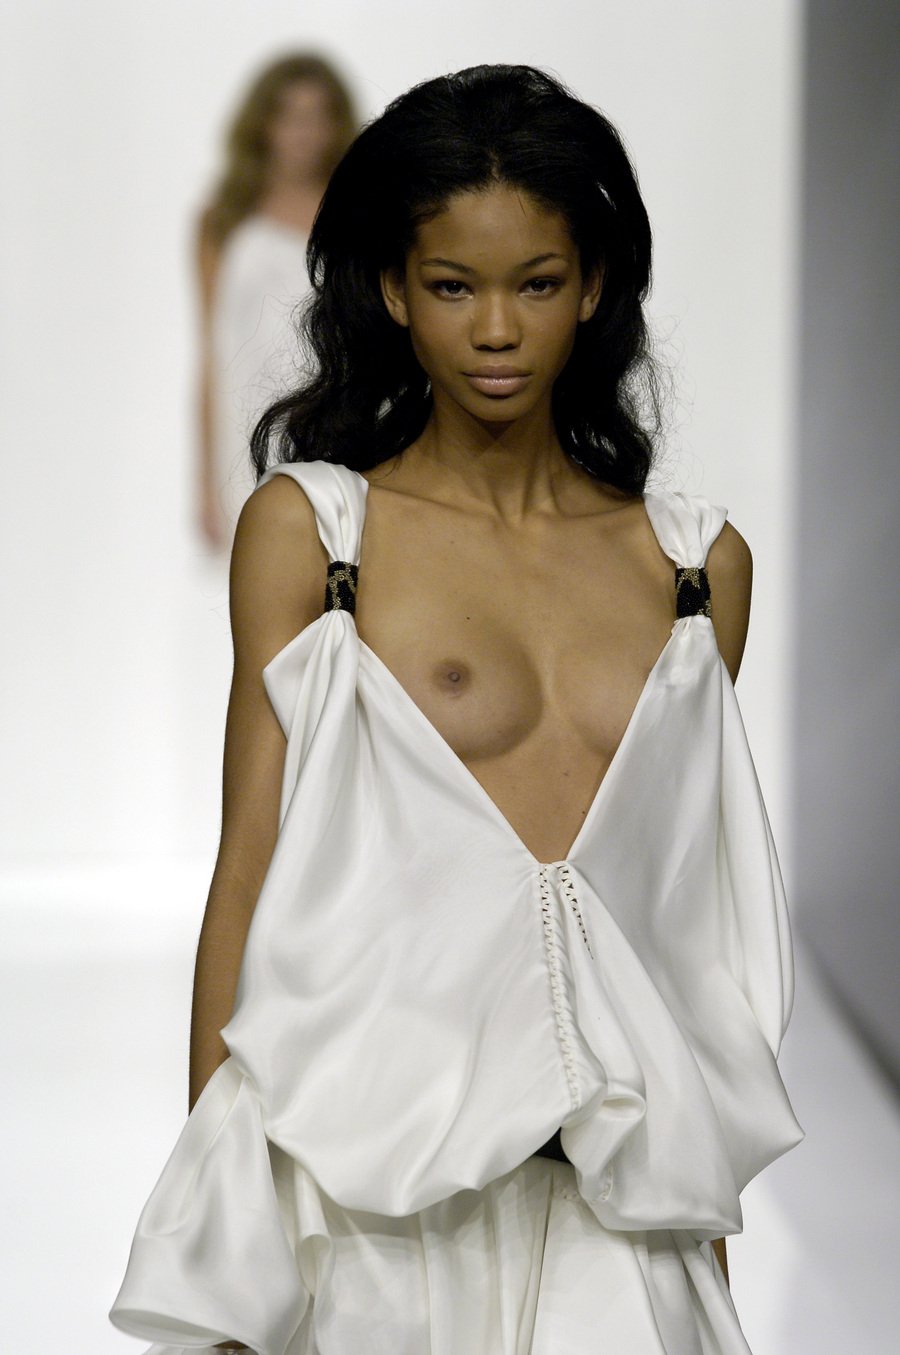 Naked Chanel Iman Added By Kaka